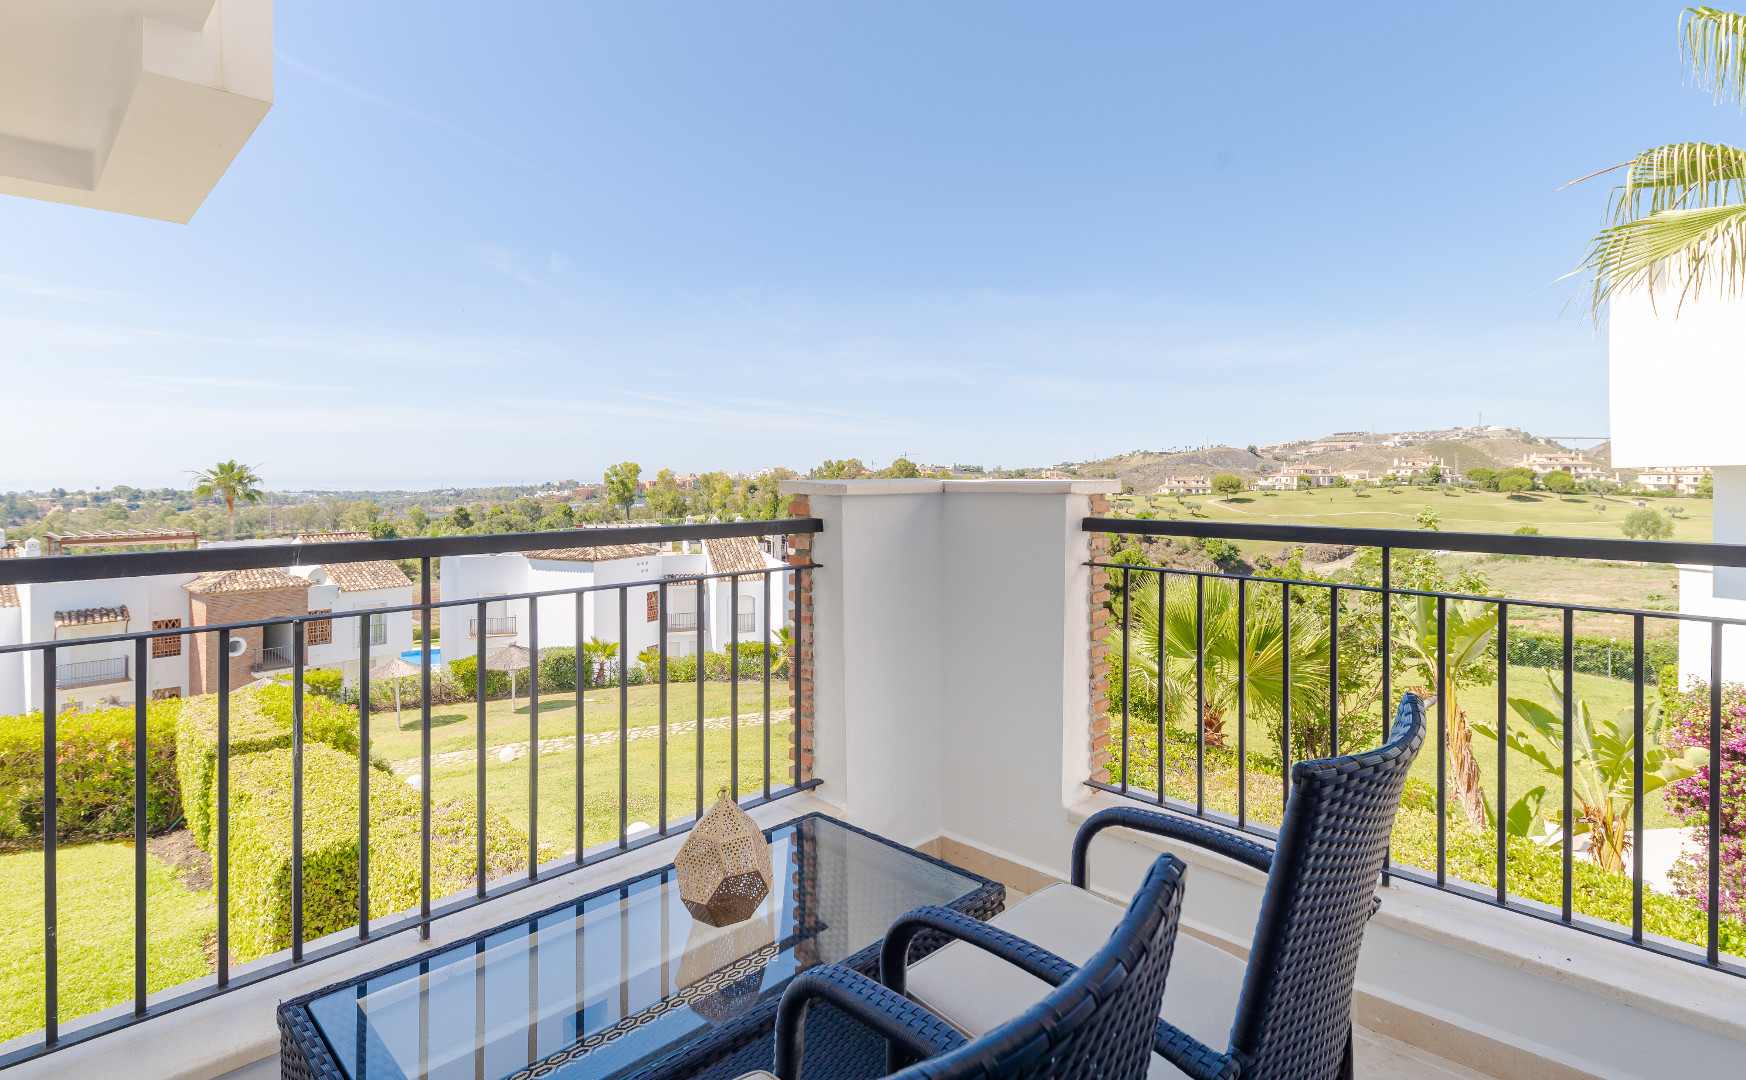 Apartment in Los Robles Los Arqueros Benahavis, fully furnished in a ‘hotel c...